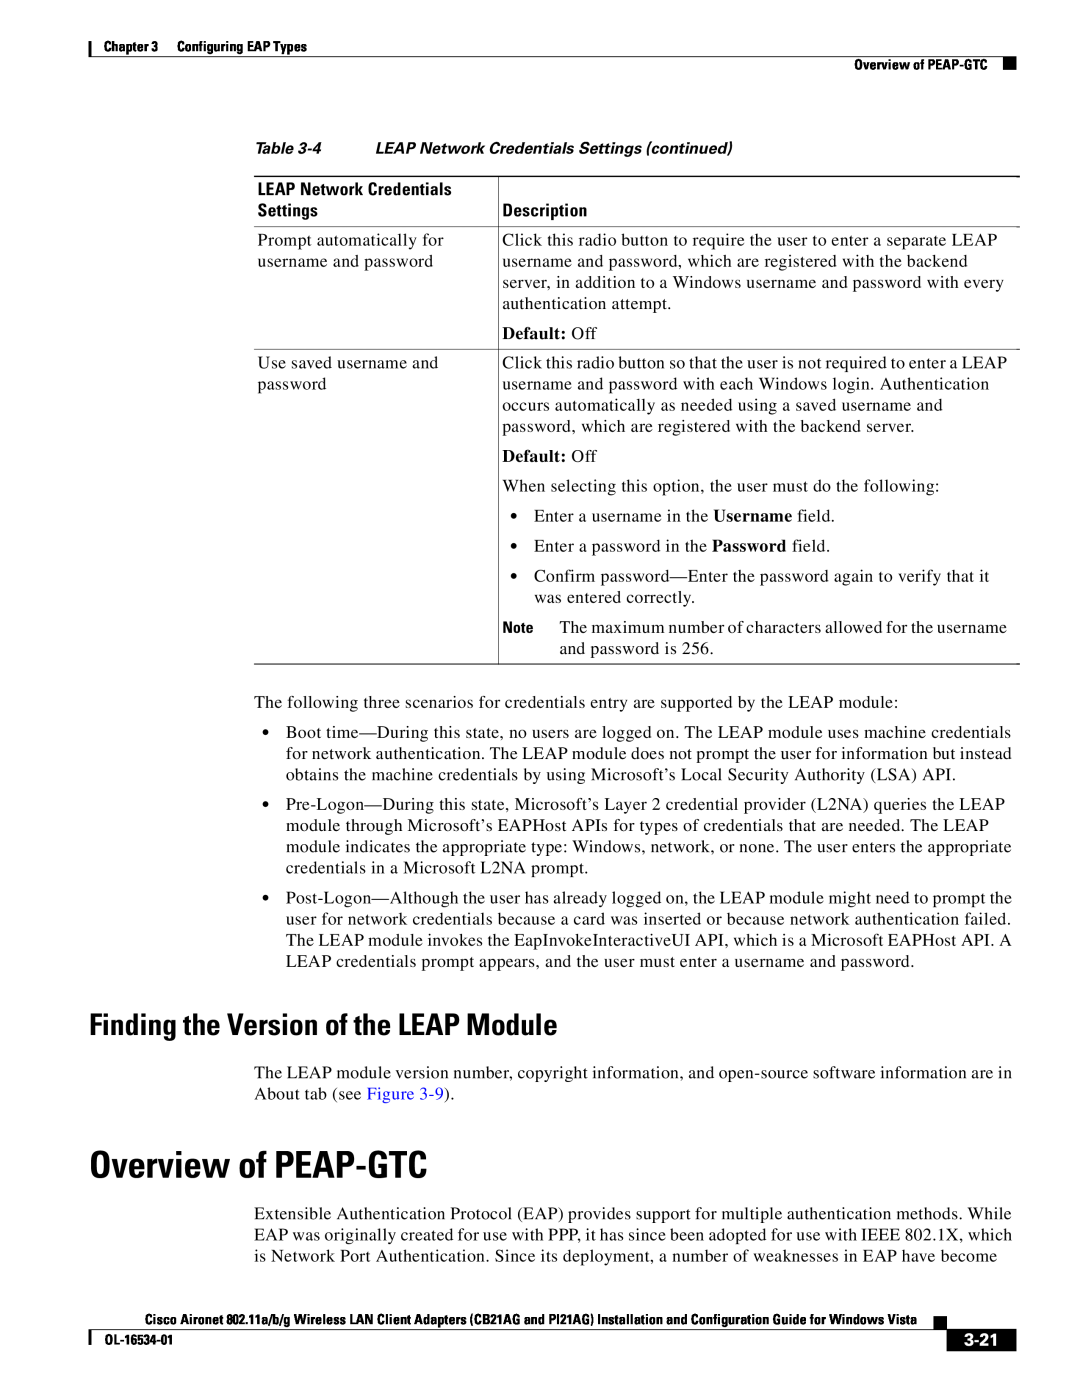 Cisco Systems CB21AG, PI21AG manual Overview of PEAP-GTC, Finding the Version of the LEAP Module, 3-21, Default Off 